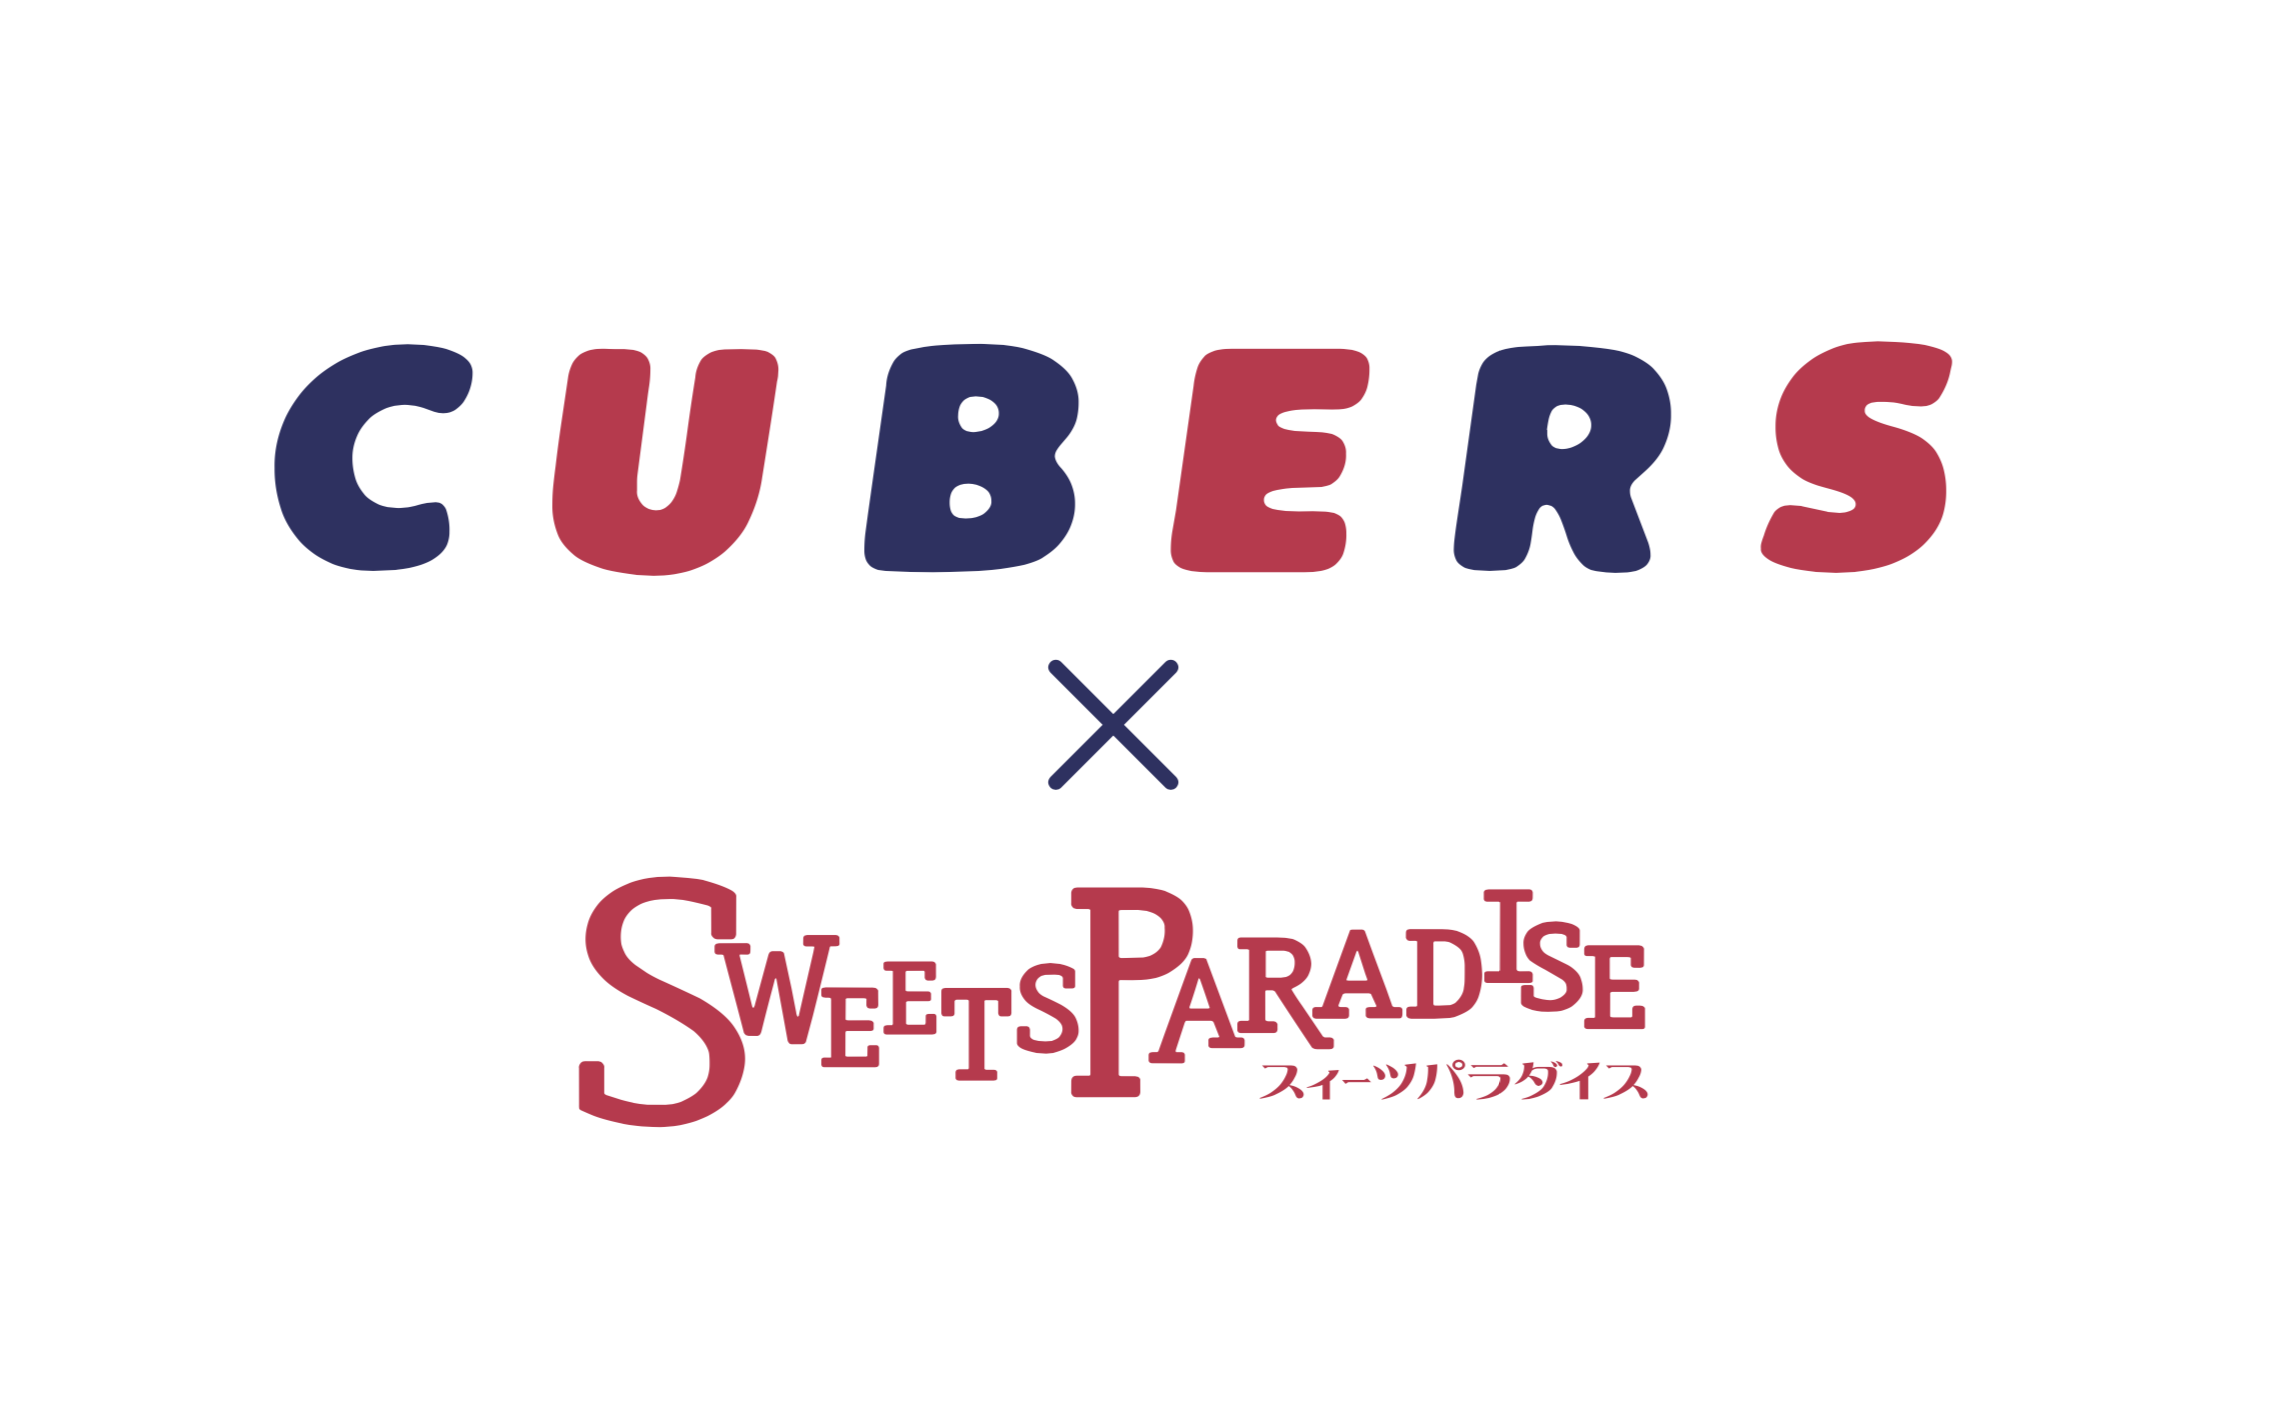 Cubers Sweets Paradise コラボカフェの開催が決定 Cubers Official Website